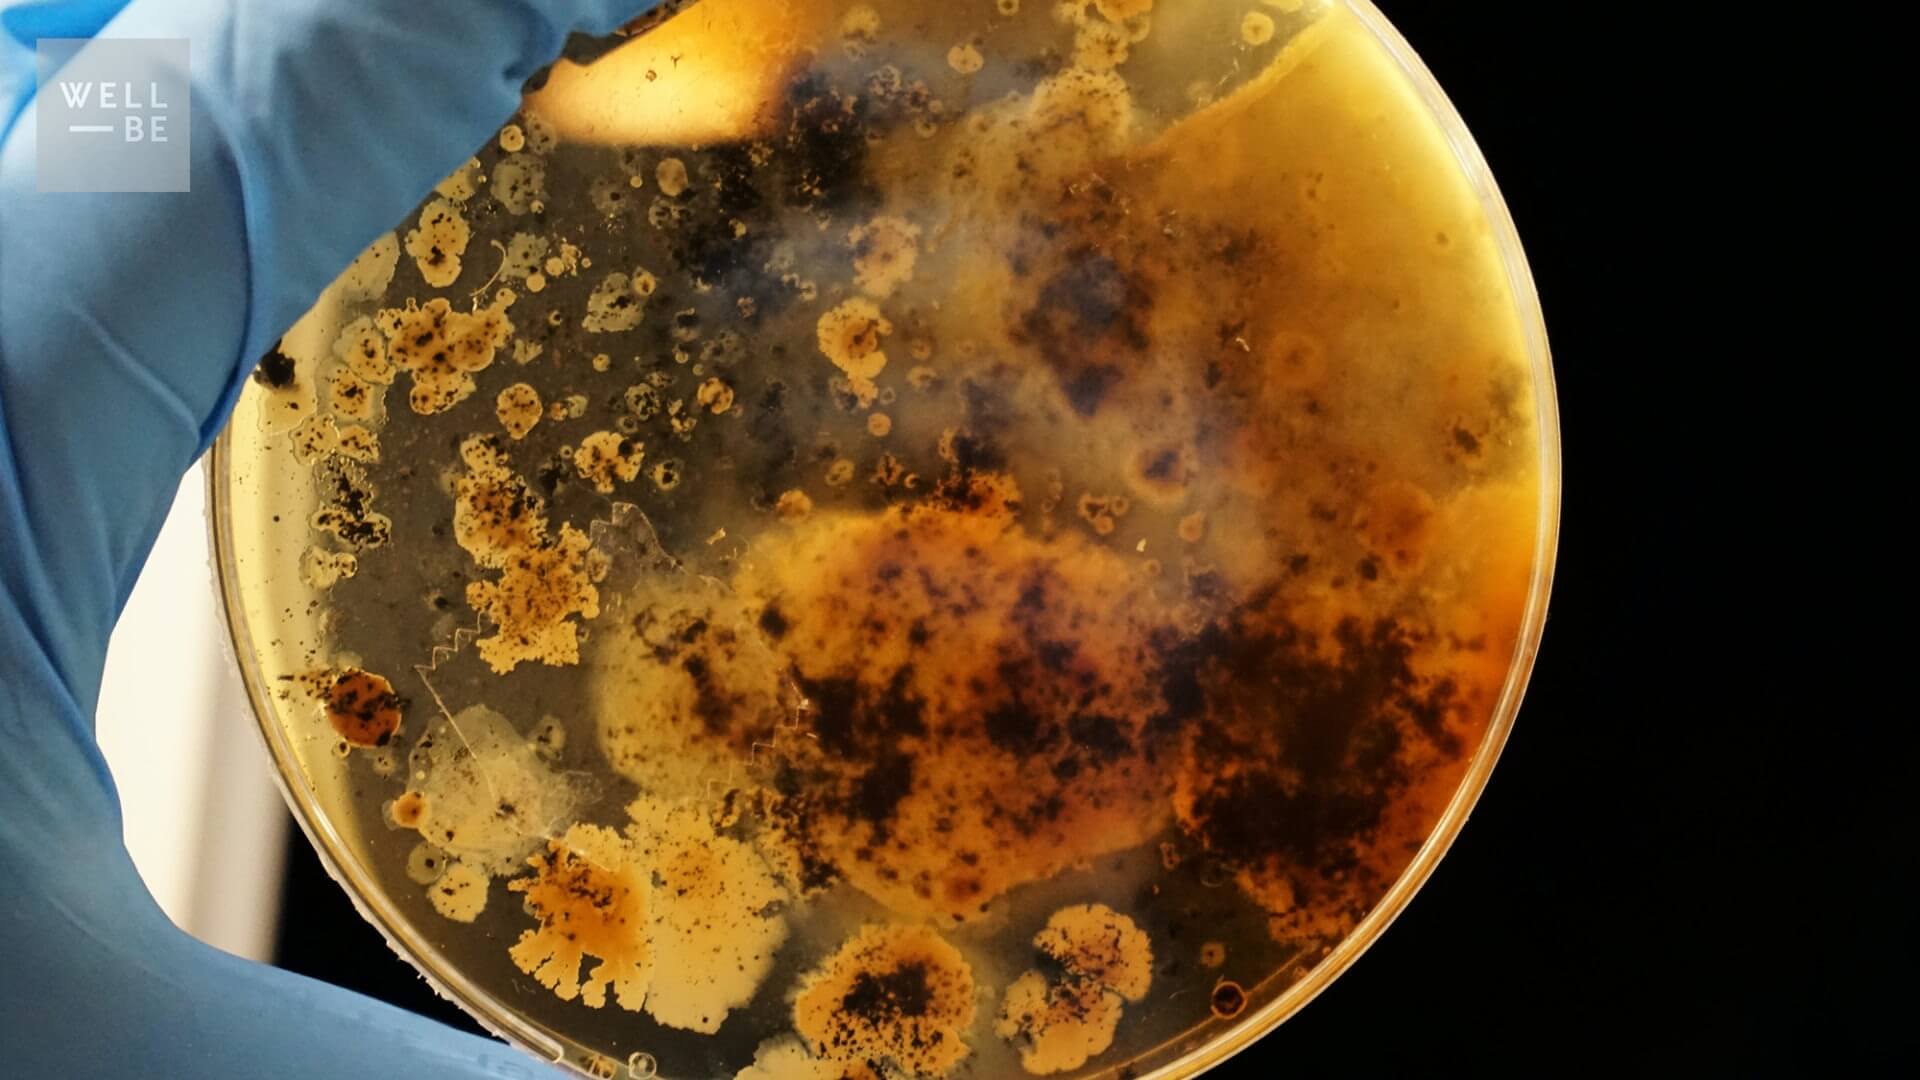 yeast overgrowth under a microscope